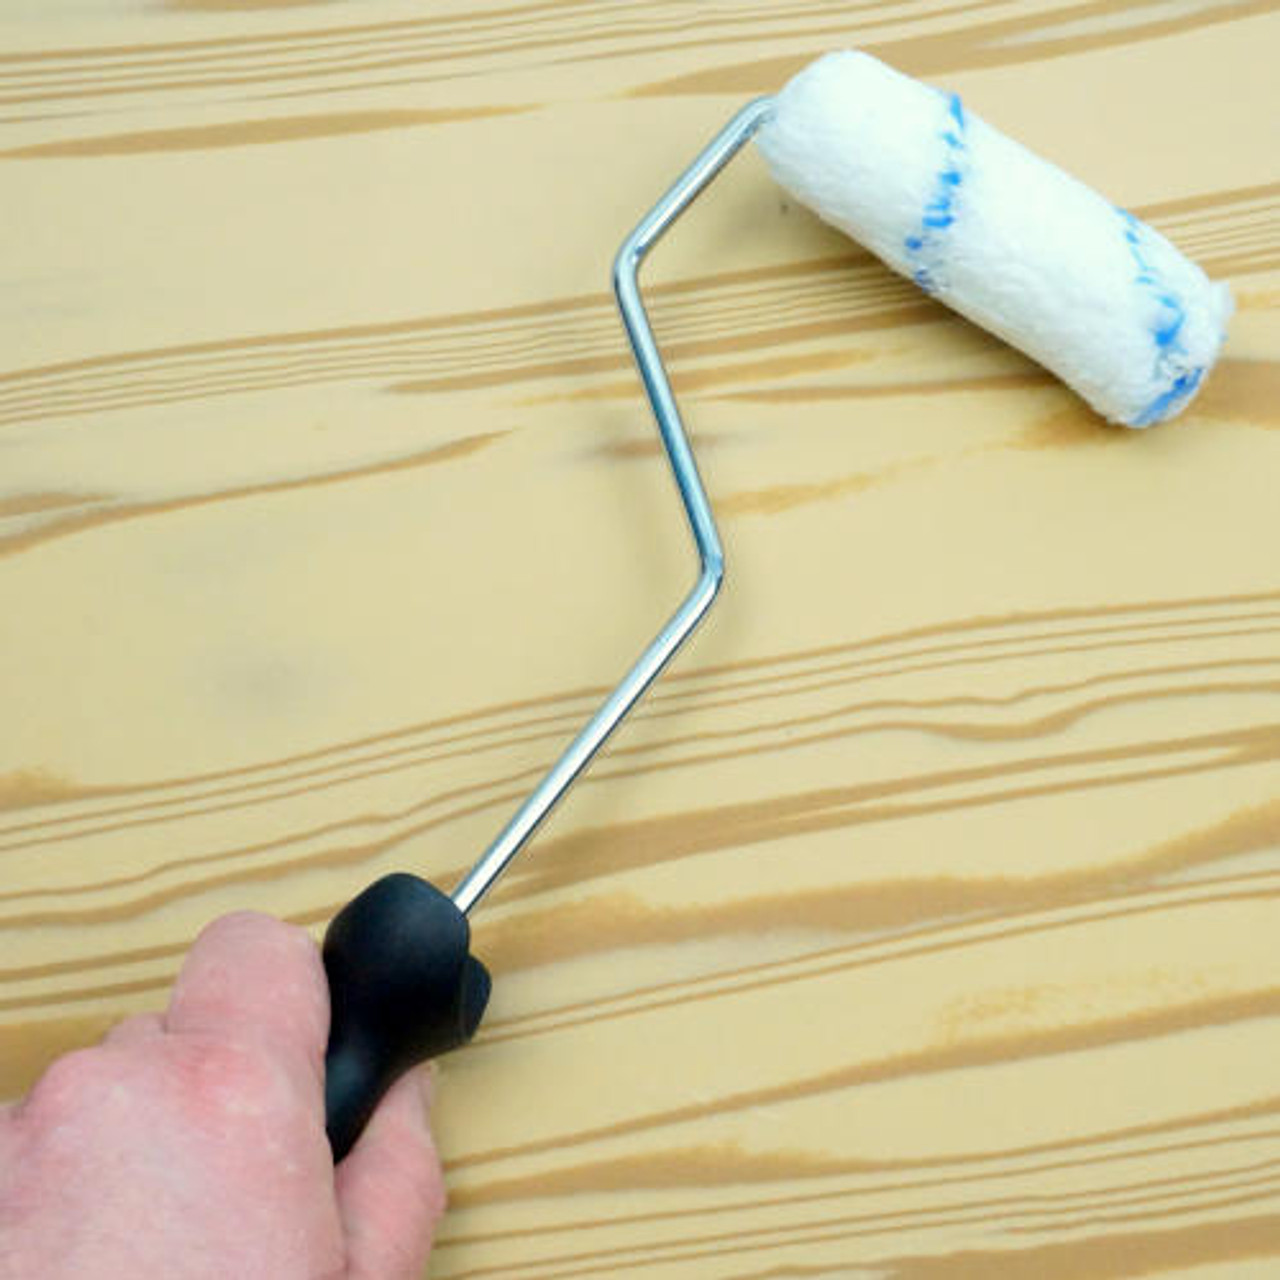 4 INCH WIDE MINI PAINT ROLLER